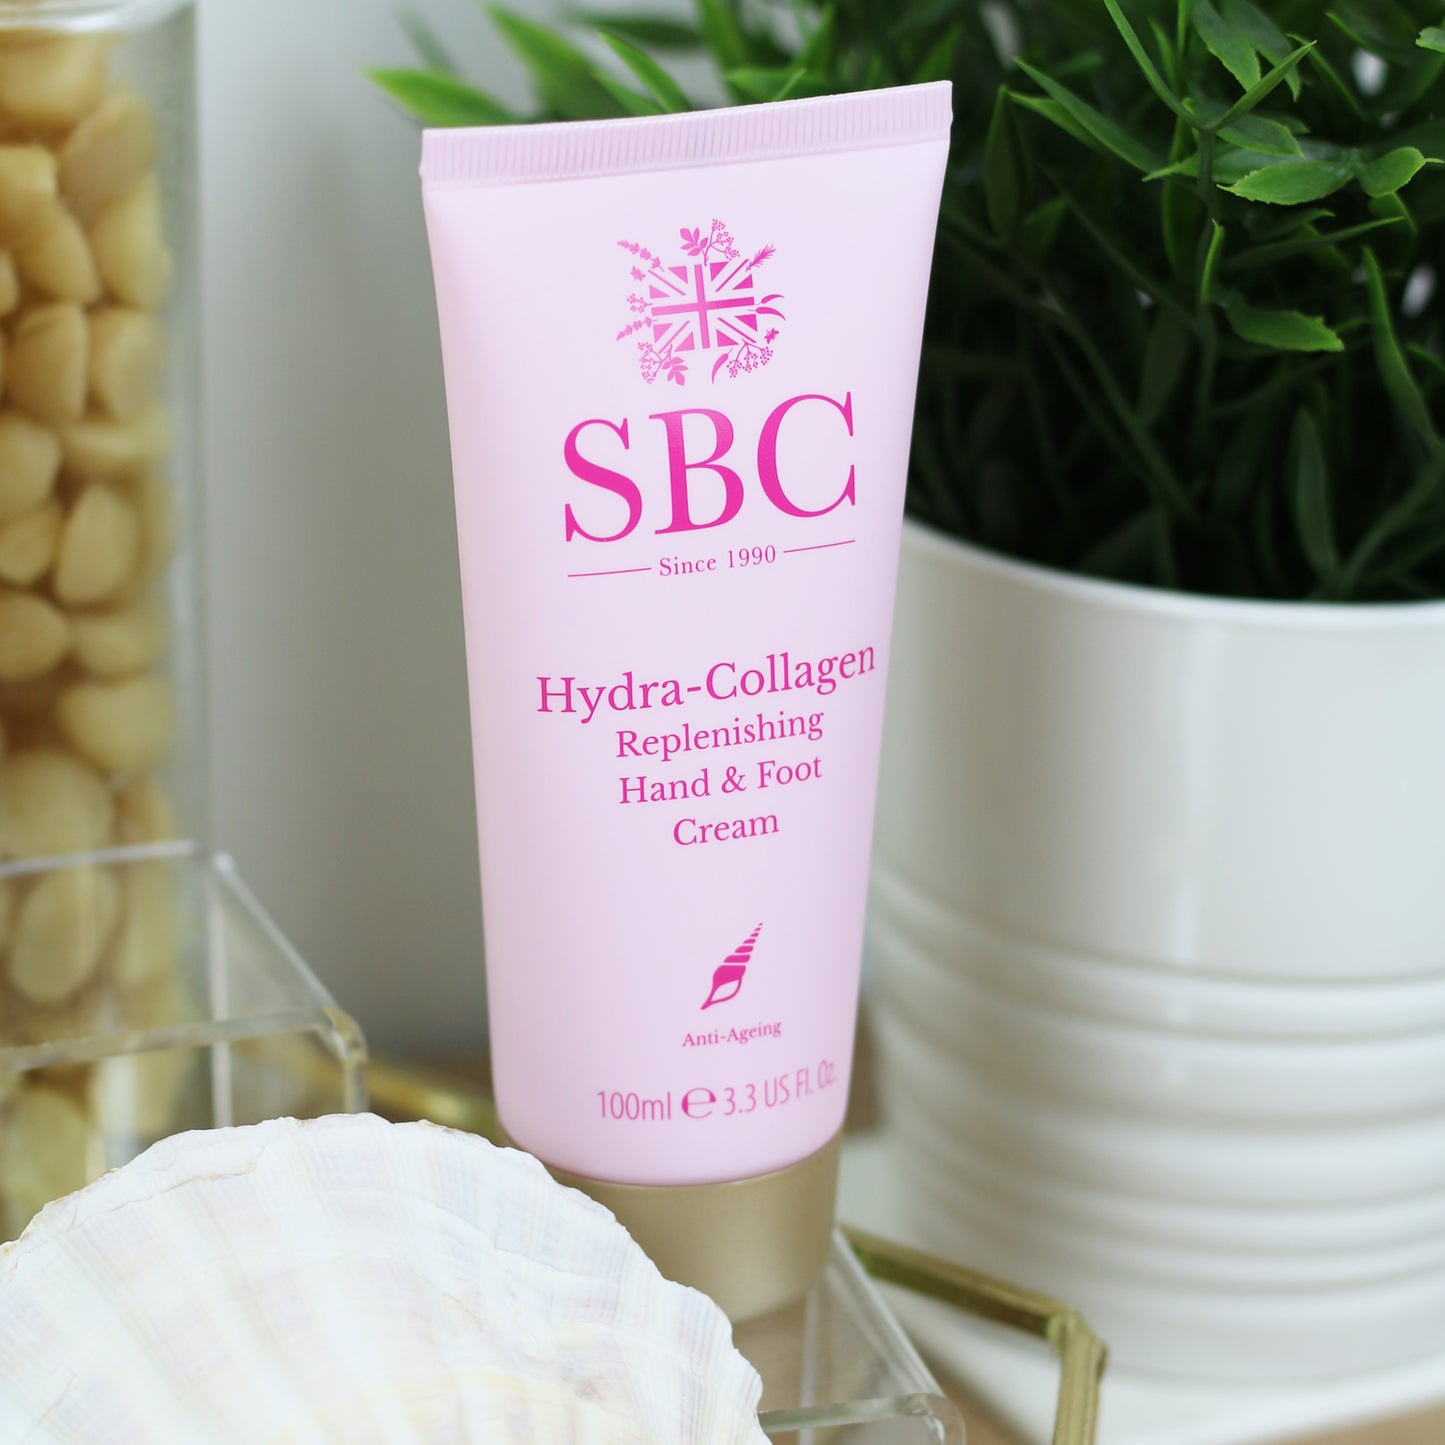 Hydra-Collagen Hand & Foot Cream in front of a plant in a white pot